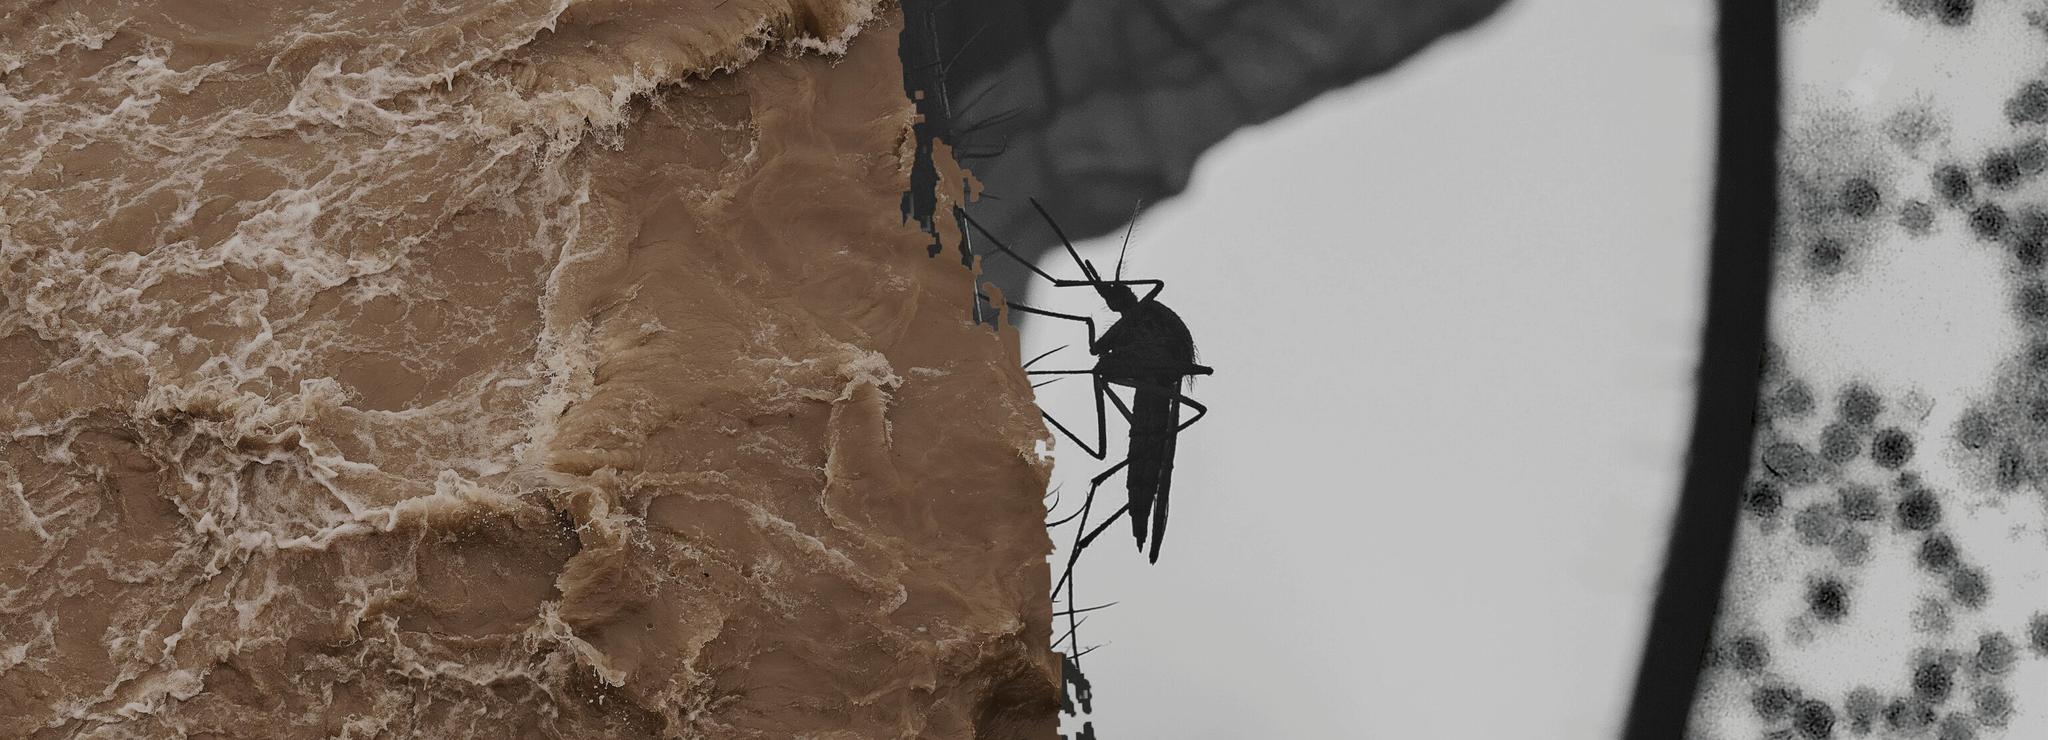 A composite image of a mosquito with flooding and microscopic imagery.